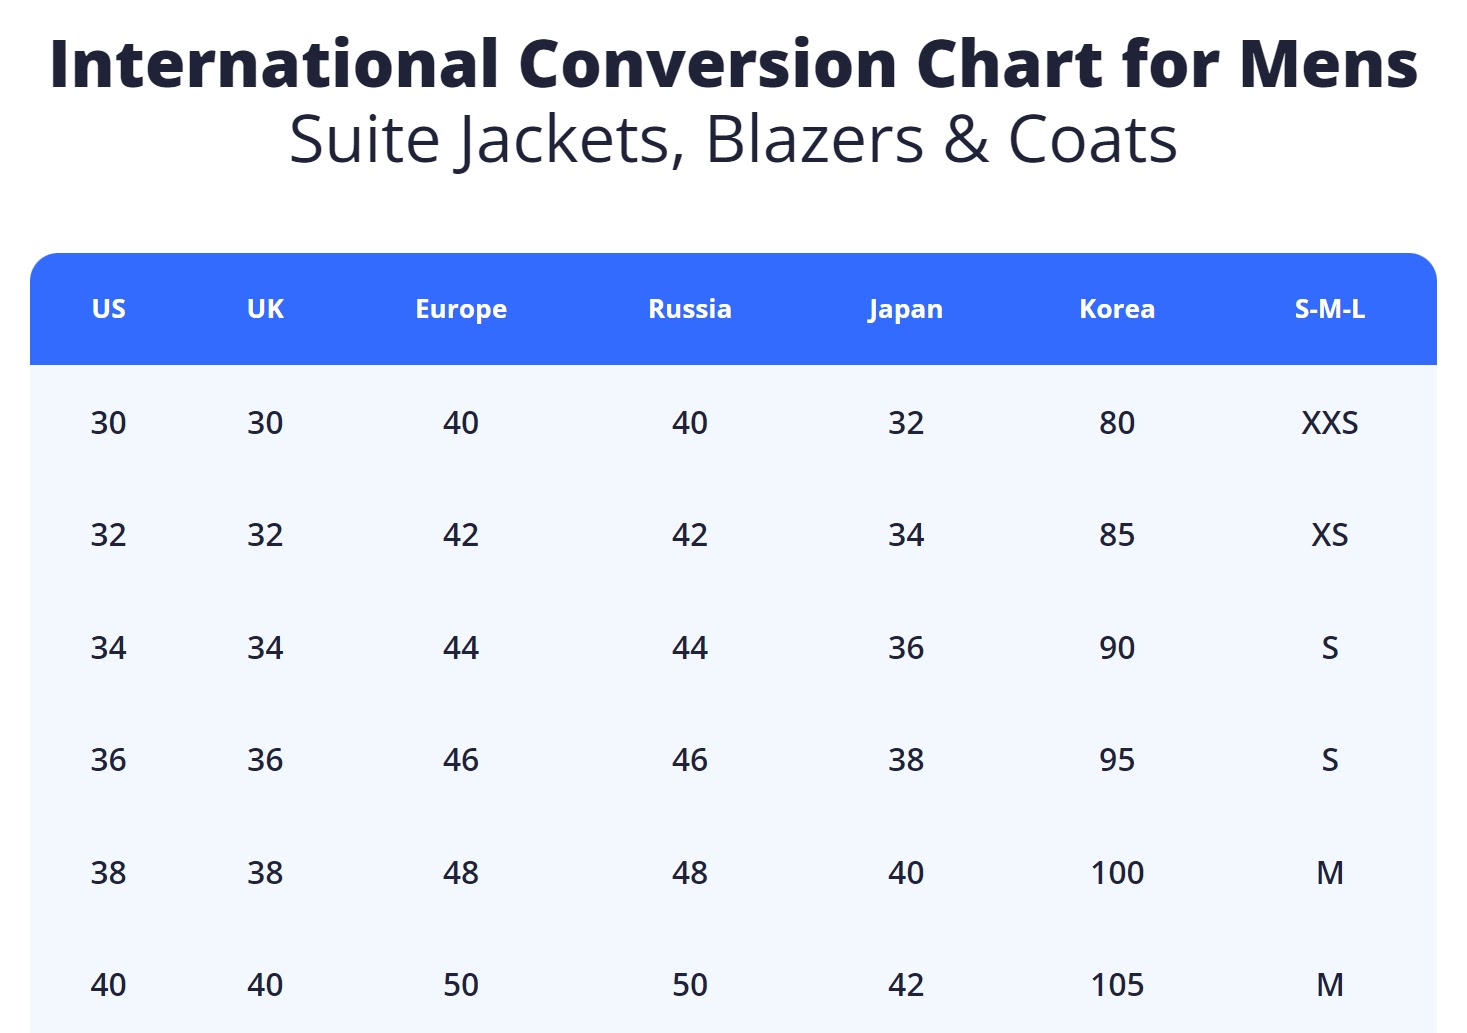 Sizely International Conversion Chart showing jacket, blazers, and coats sizes by country.